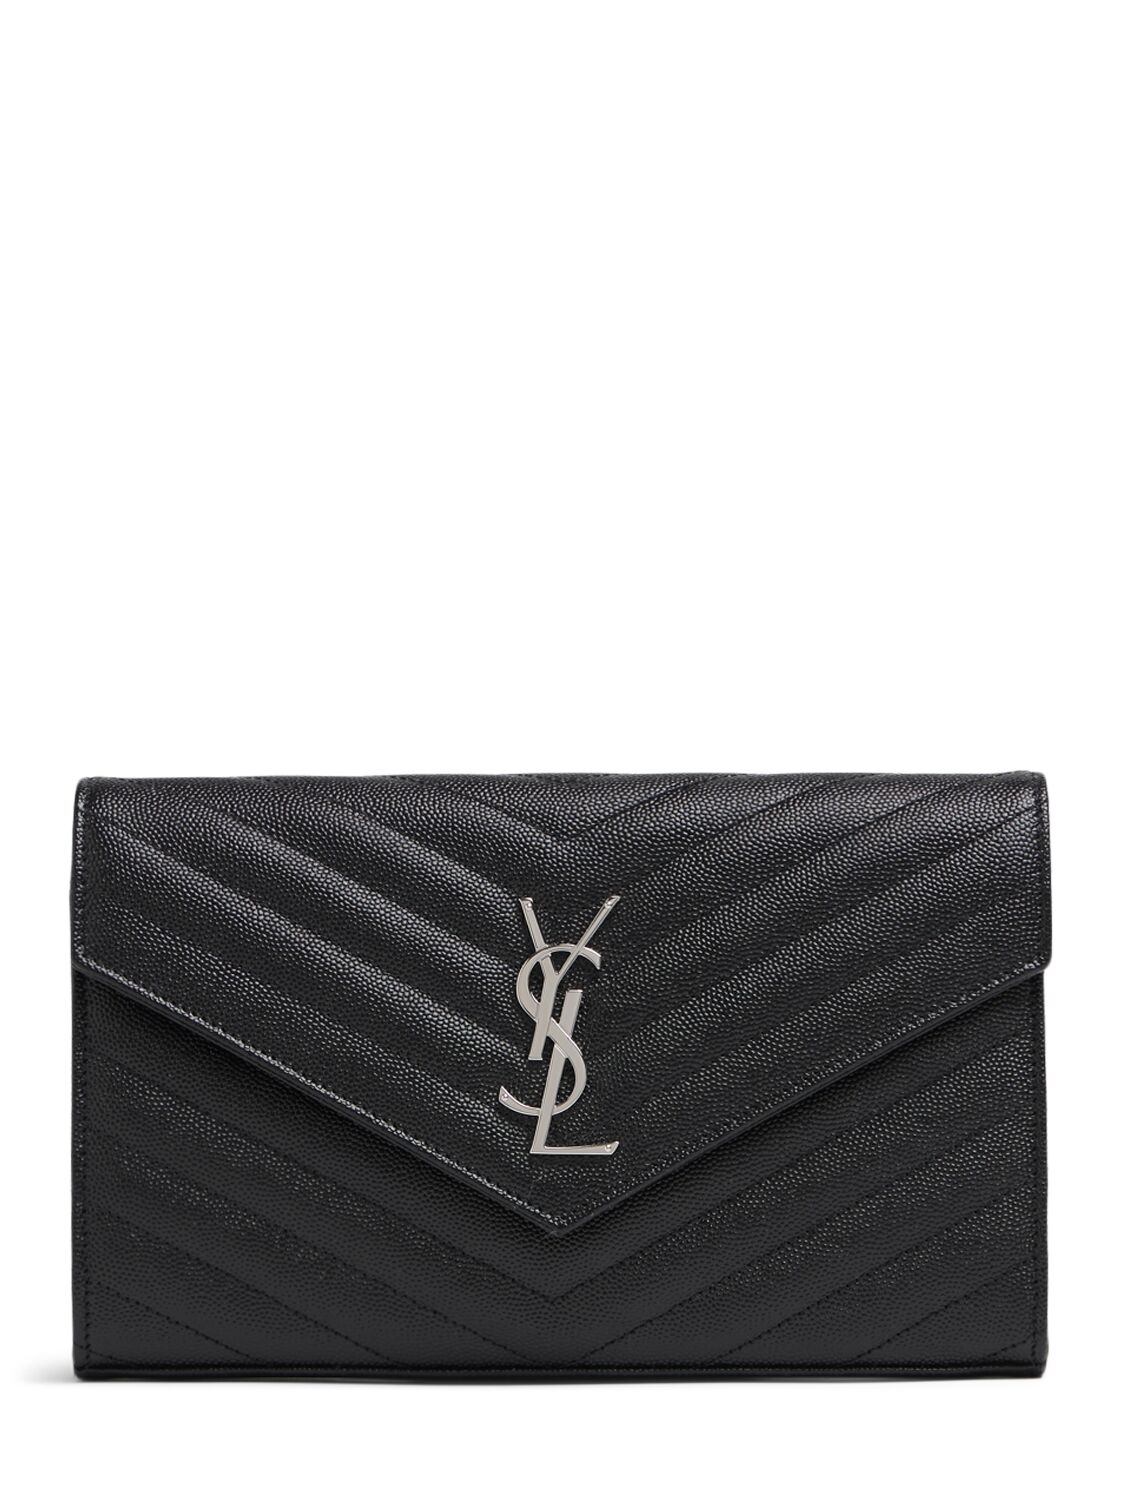 Monogram Embossed Leather Chain Wallet